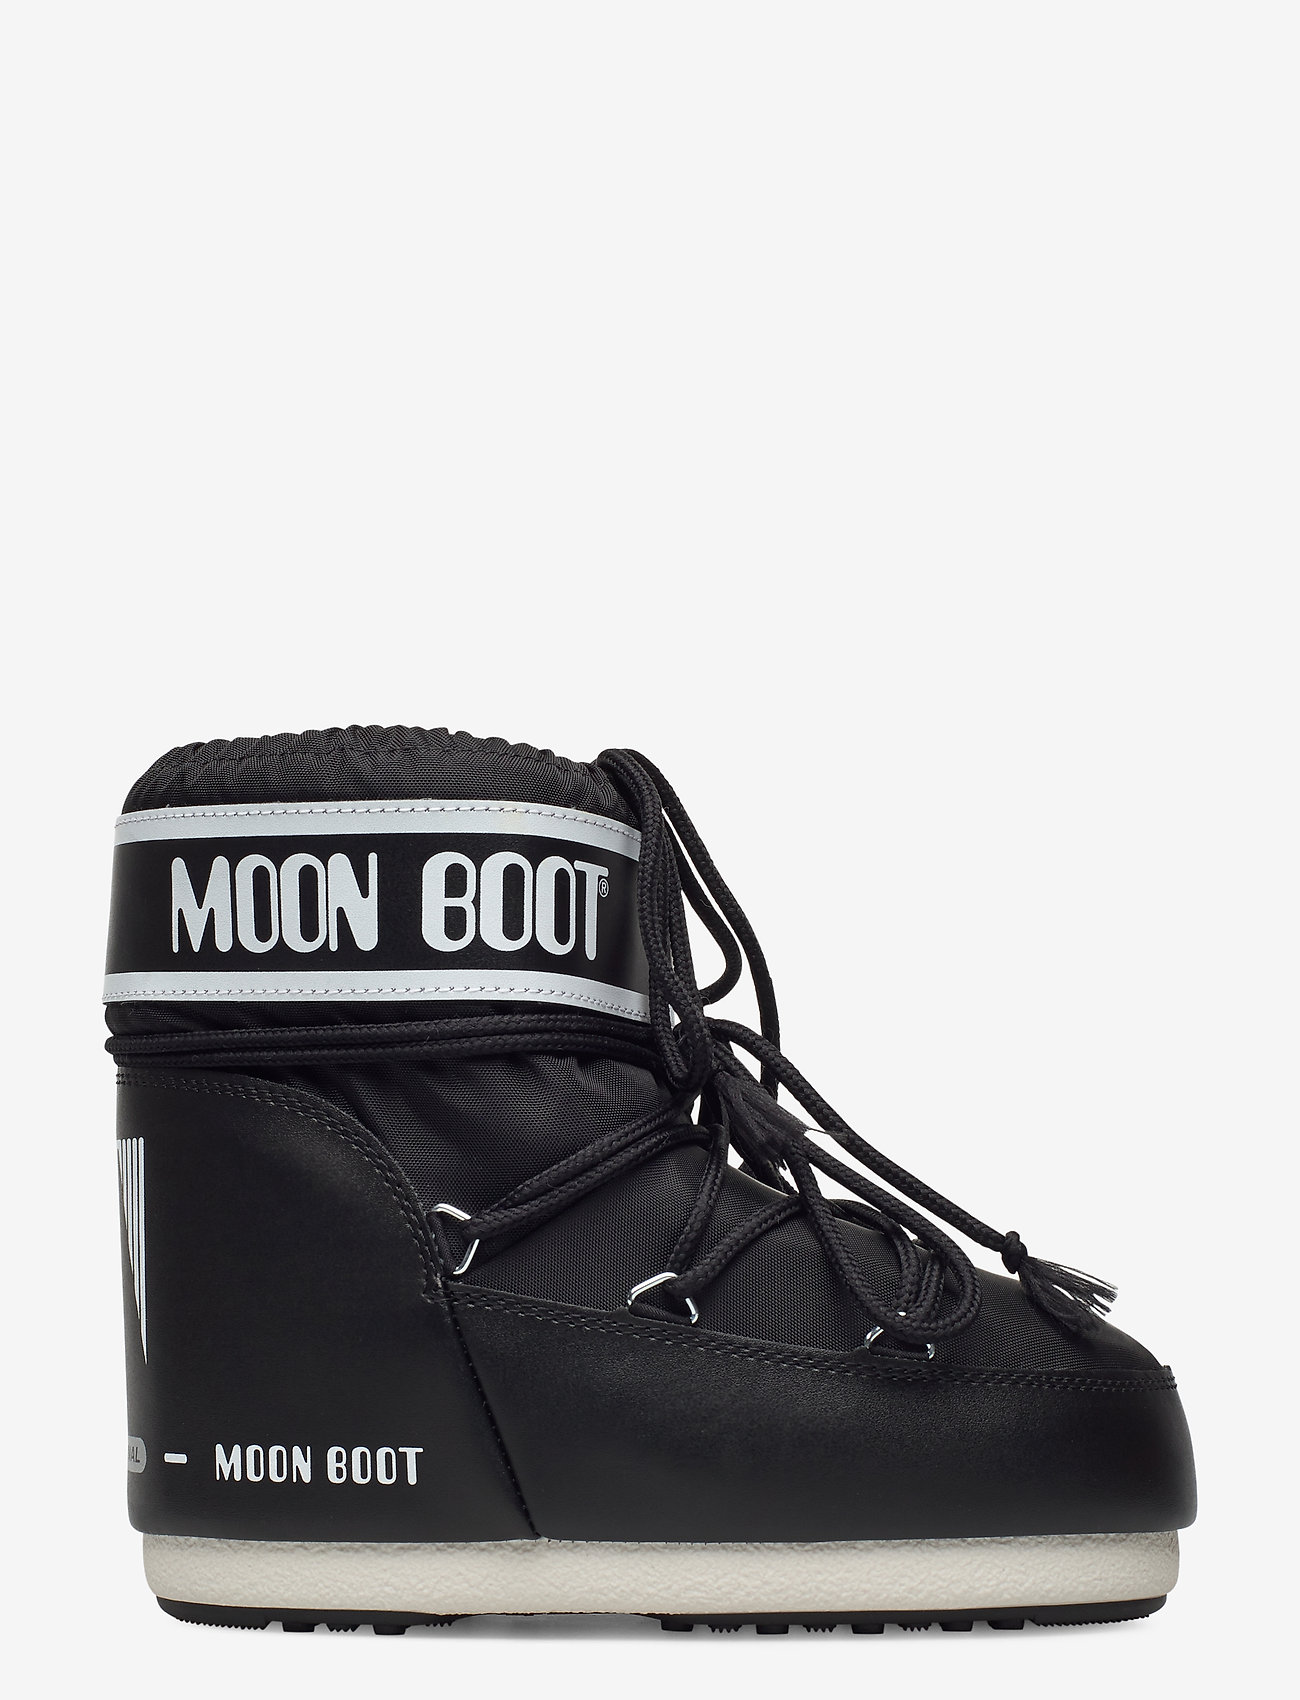 moon boots low black